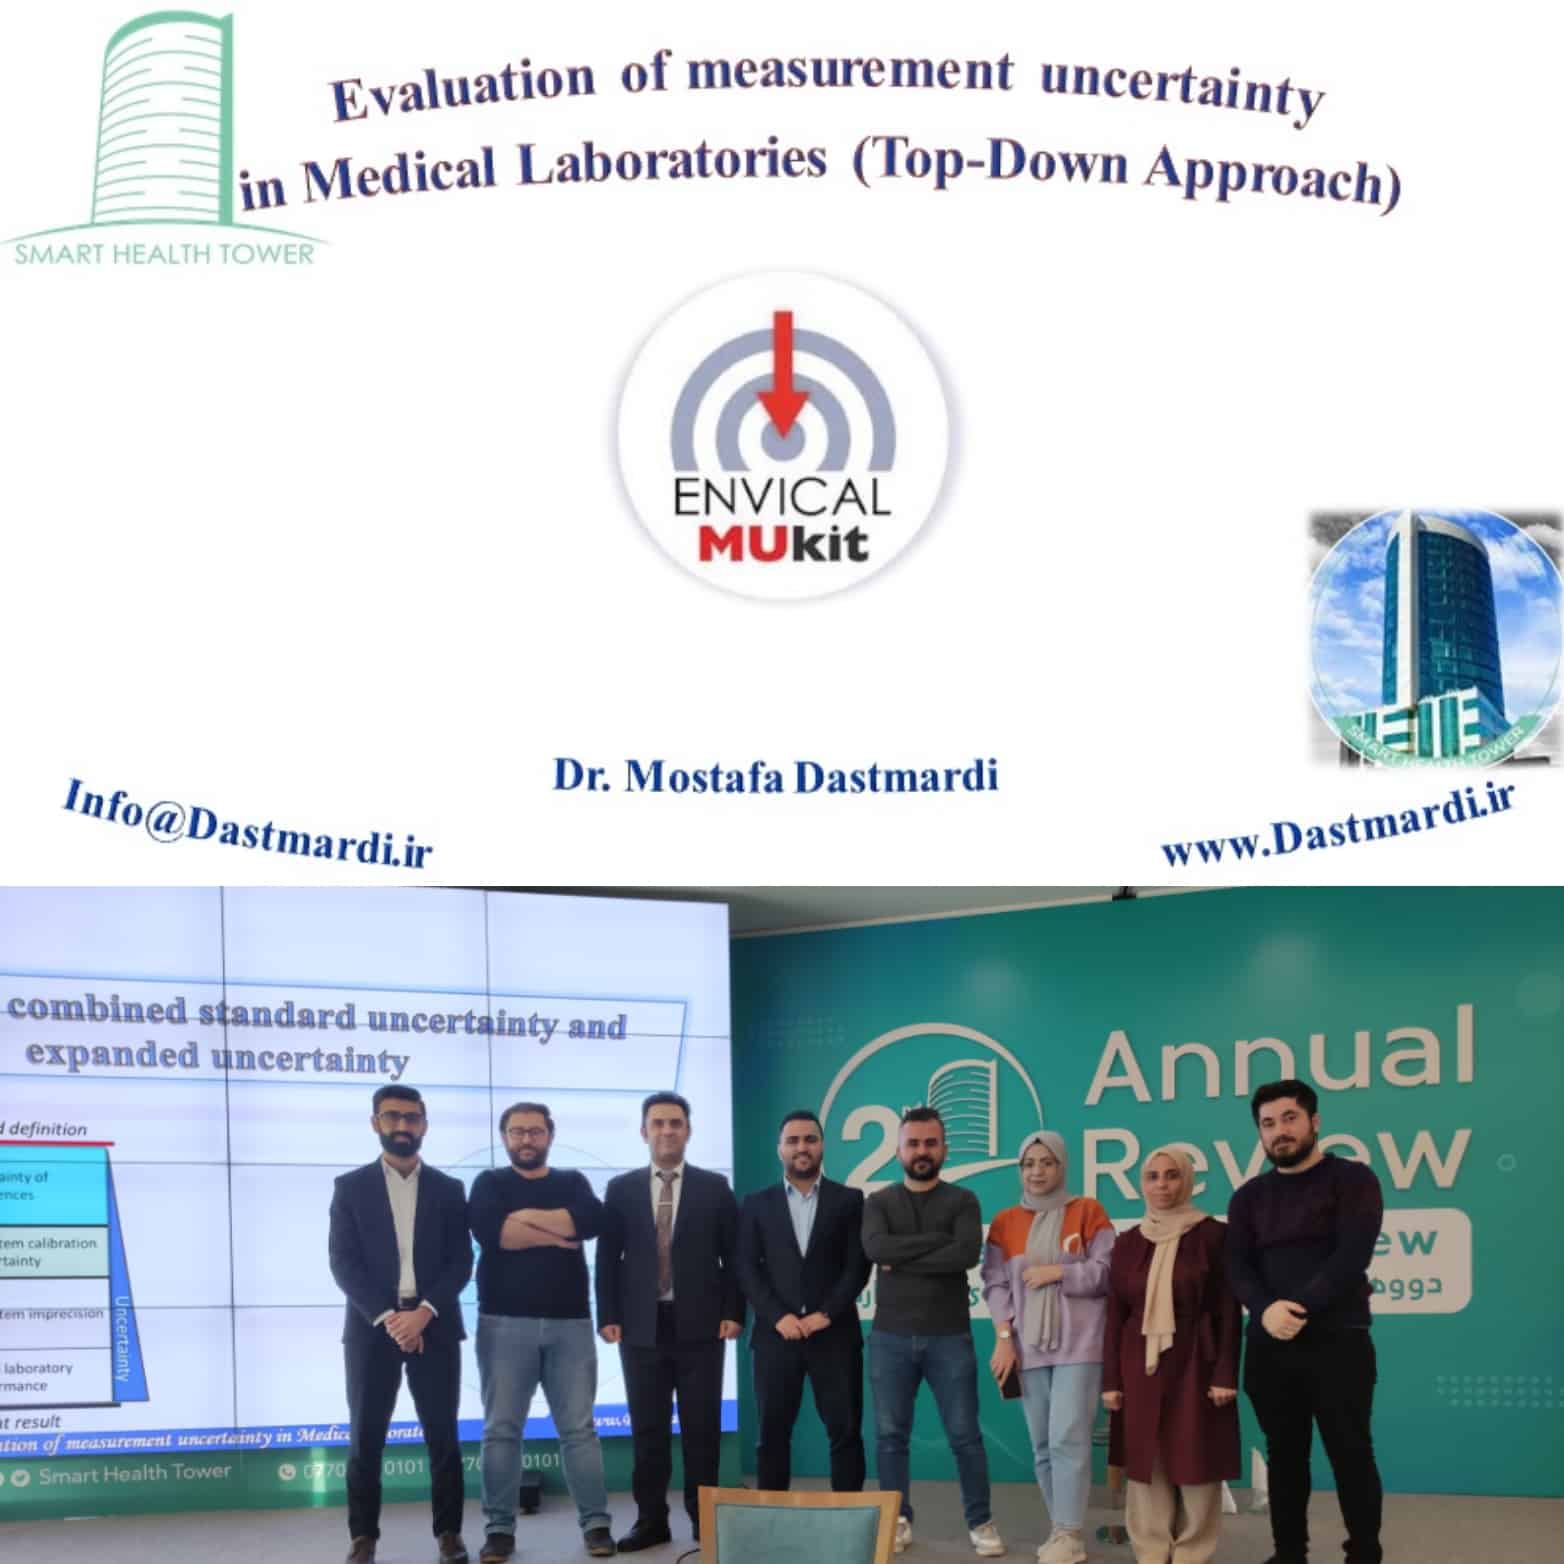 IMG 20221230 114200 Evaluation of measurement uncertainty in Medical Laboratories (Top-Down Approach)